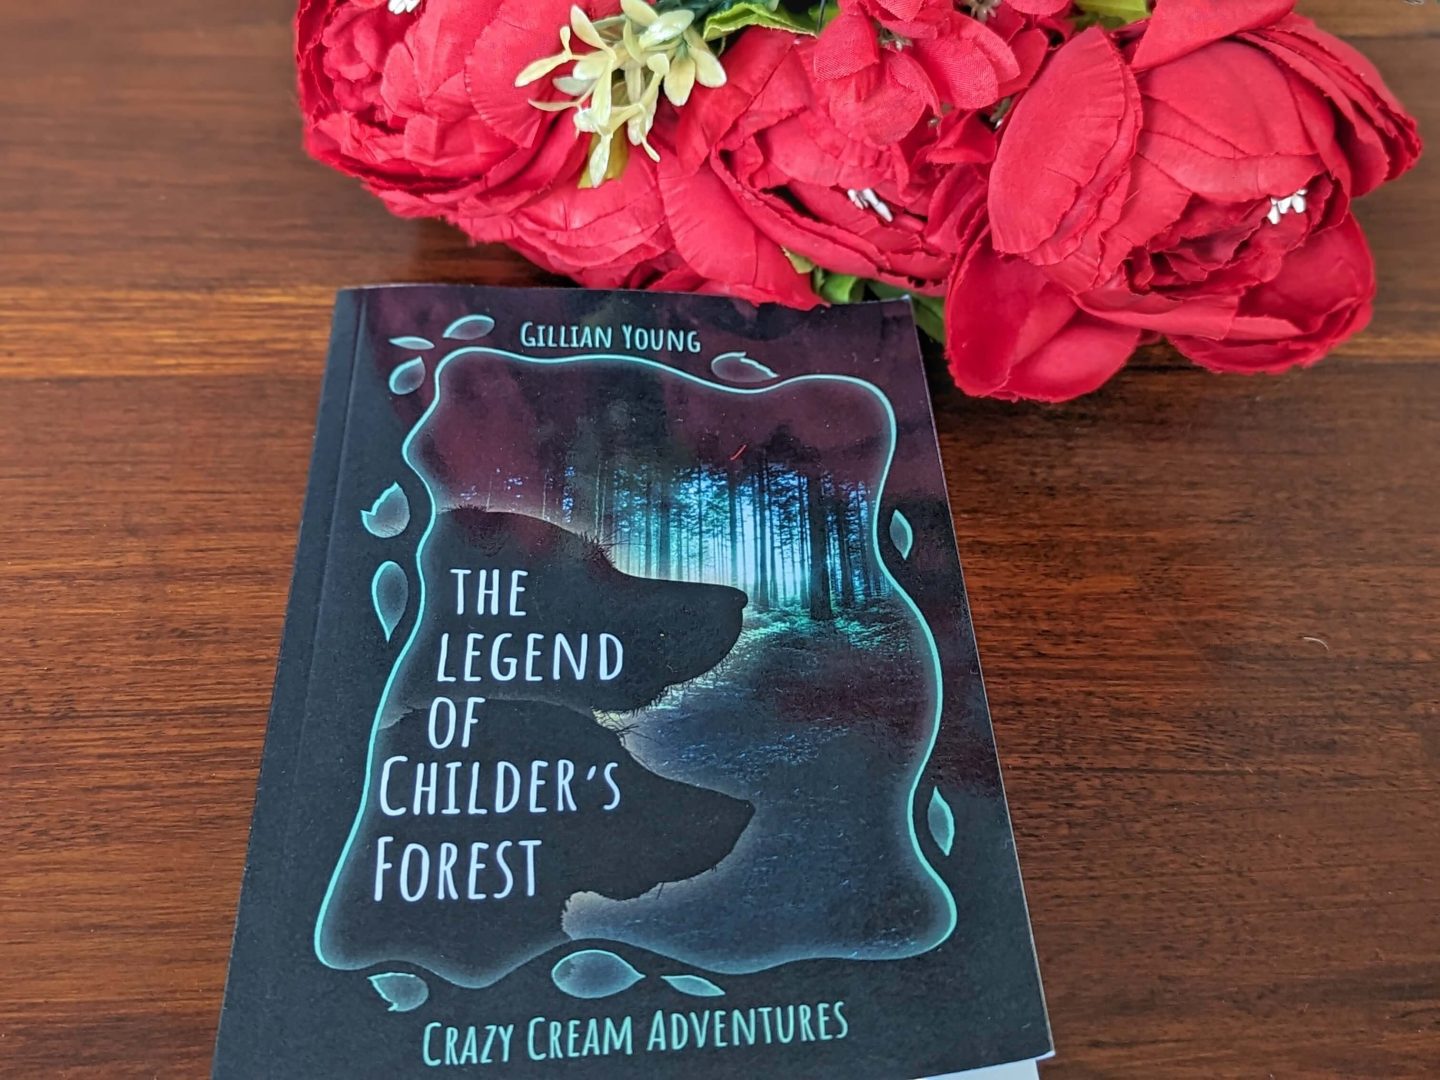 The Legend of Childer's Forest book displayed on a wooden table beside a bunch of red flowers for the something to read section of the four gift rule Christmas gift guide